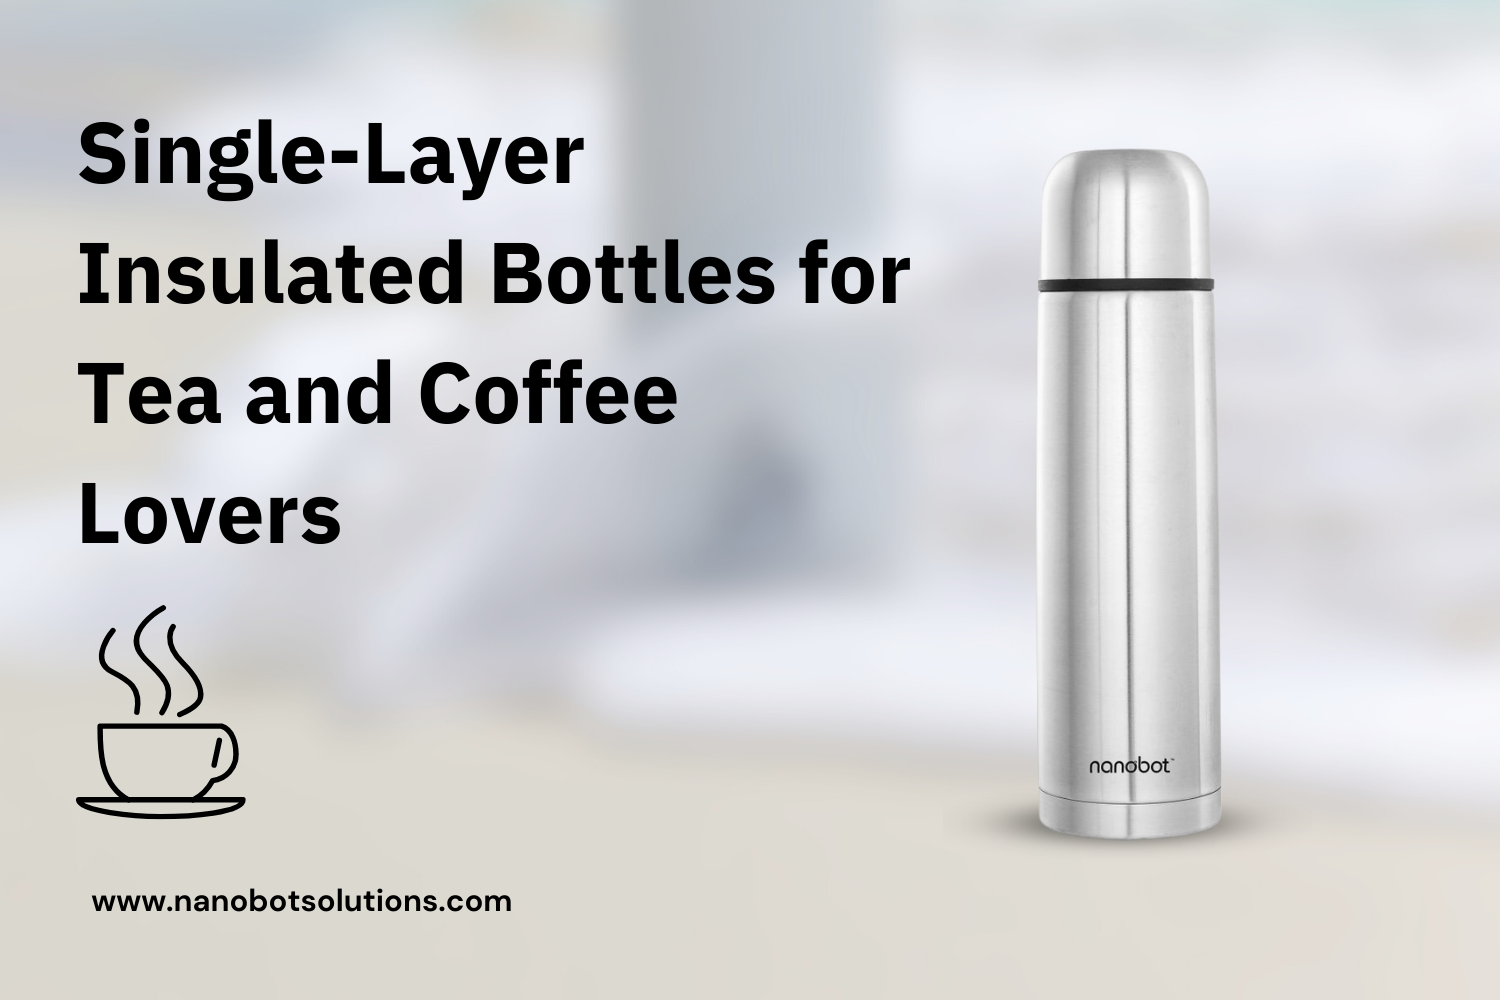  Single-Layer Insulated Bottles for Tea and Coffee Lovers